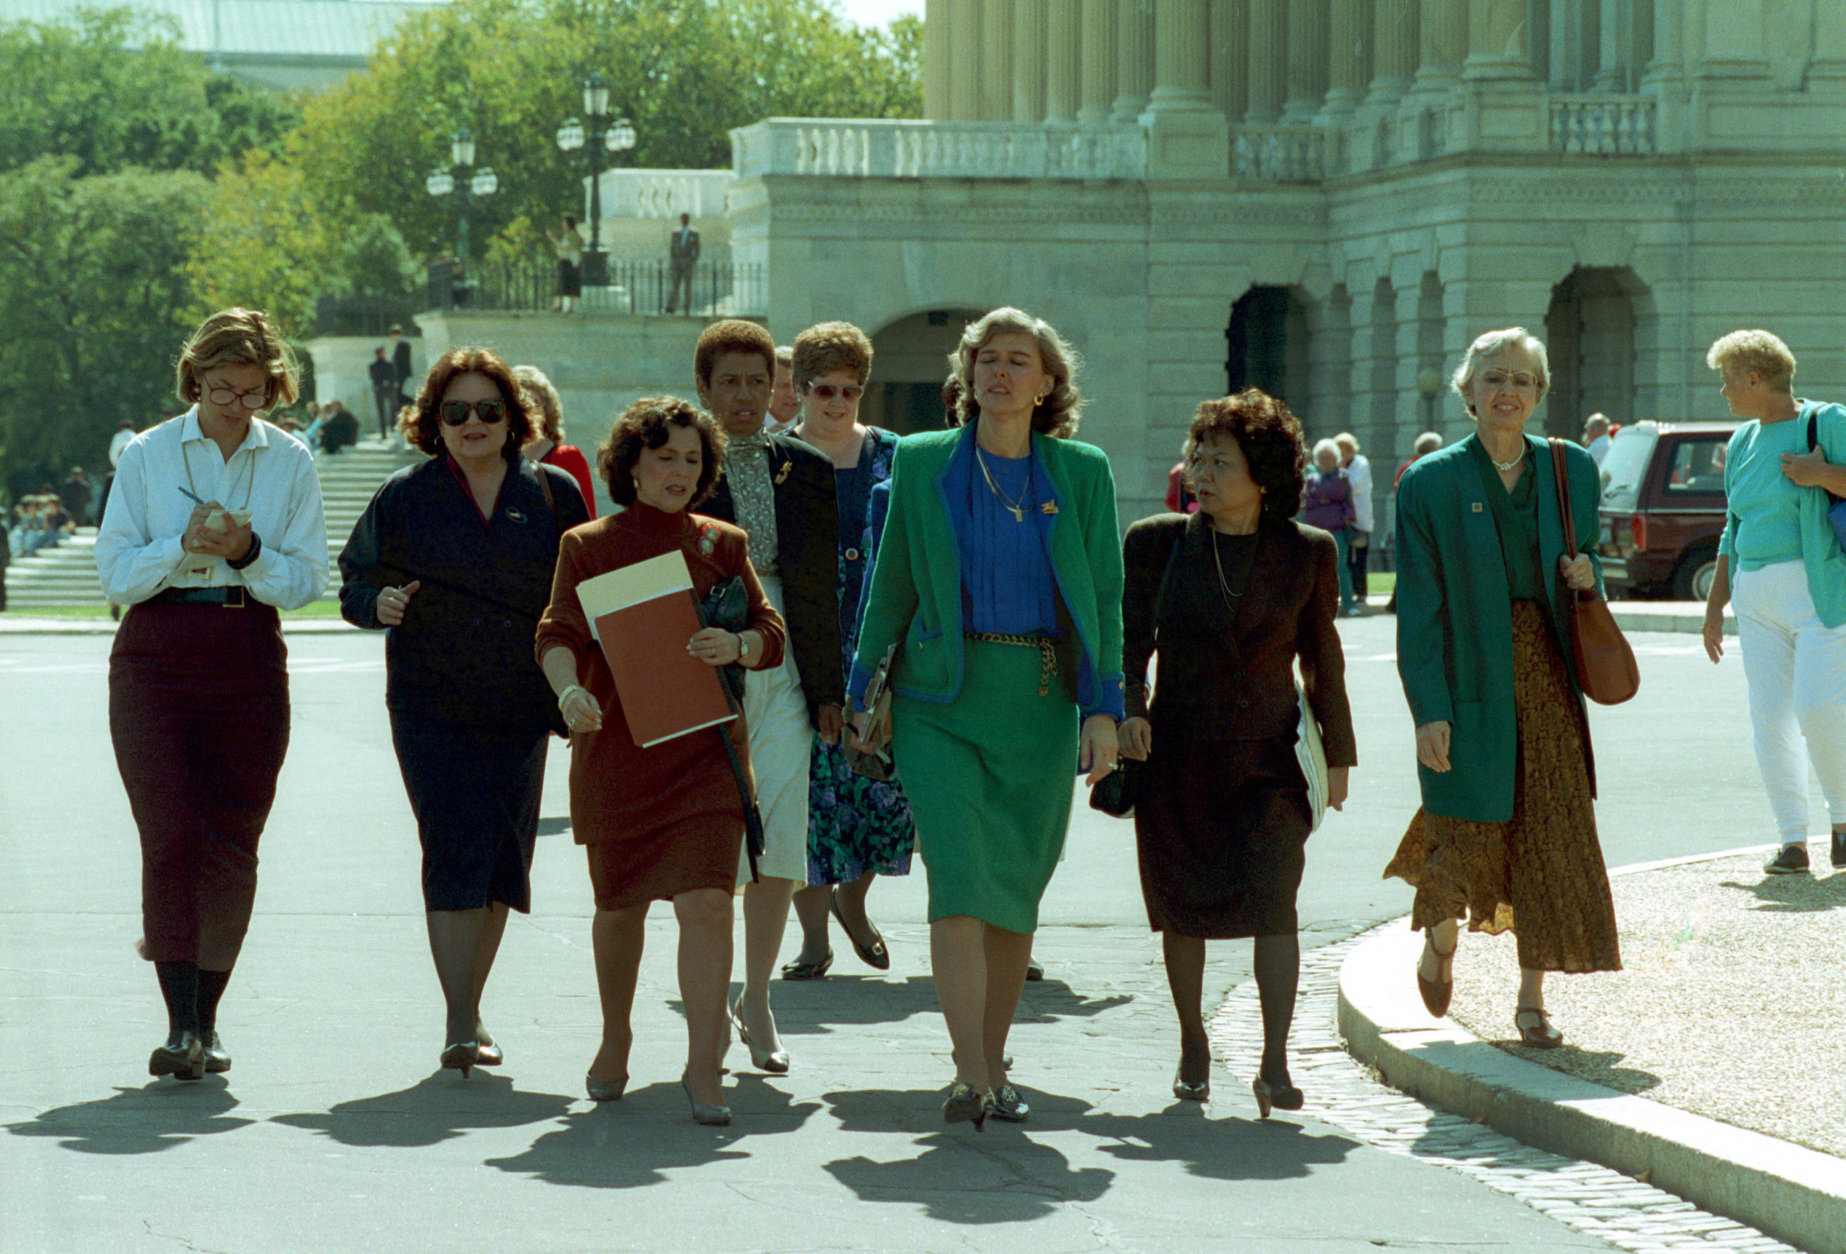 Rep. Patricia Schroeder, D-Colo., center, leads a delegation of congressswomen from the House to the Senate on Capitol Hill to voice their concerns on the nomination of Clarence Thomas to the Supreme Court in Washington D.C., Oct. 8, 1991.  Accompanying Schroeder, from left, are, Louise Slaughter, D-N.Y., Barbara Boxer, D-Calif., Eleanor Holmes-Norton, D-D.C., Nita Lowey, D-N.Y., Patsey Mink, D-Hi., and Jolene Unsoeld, D-Wash.  (AP Photo/Marcy Nighswander)